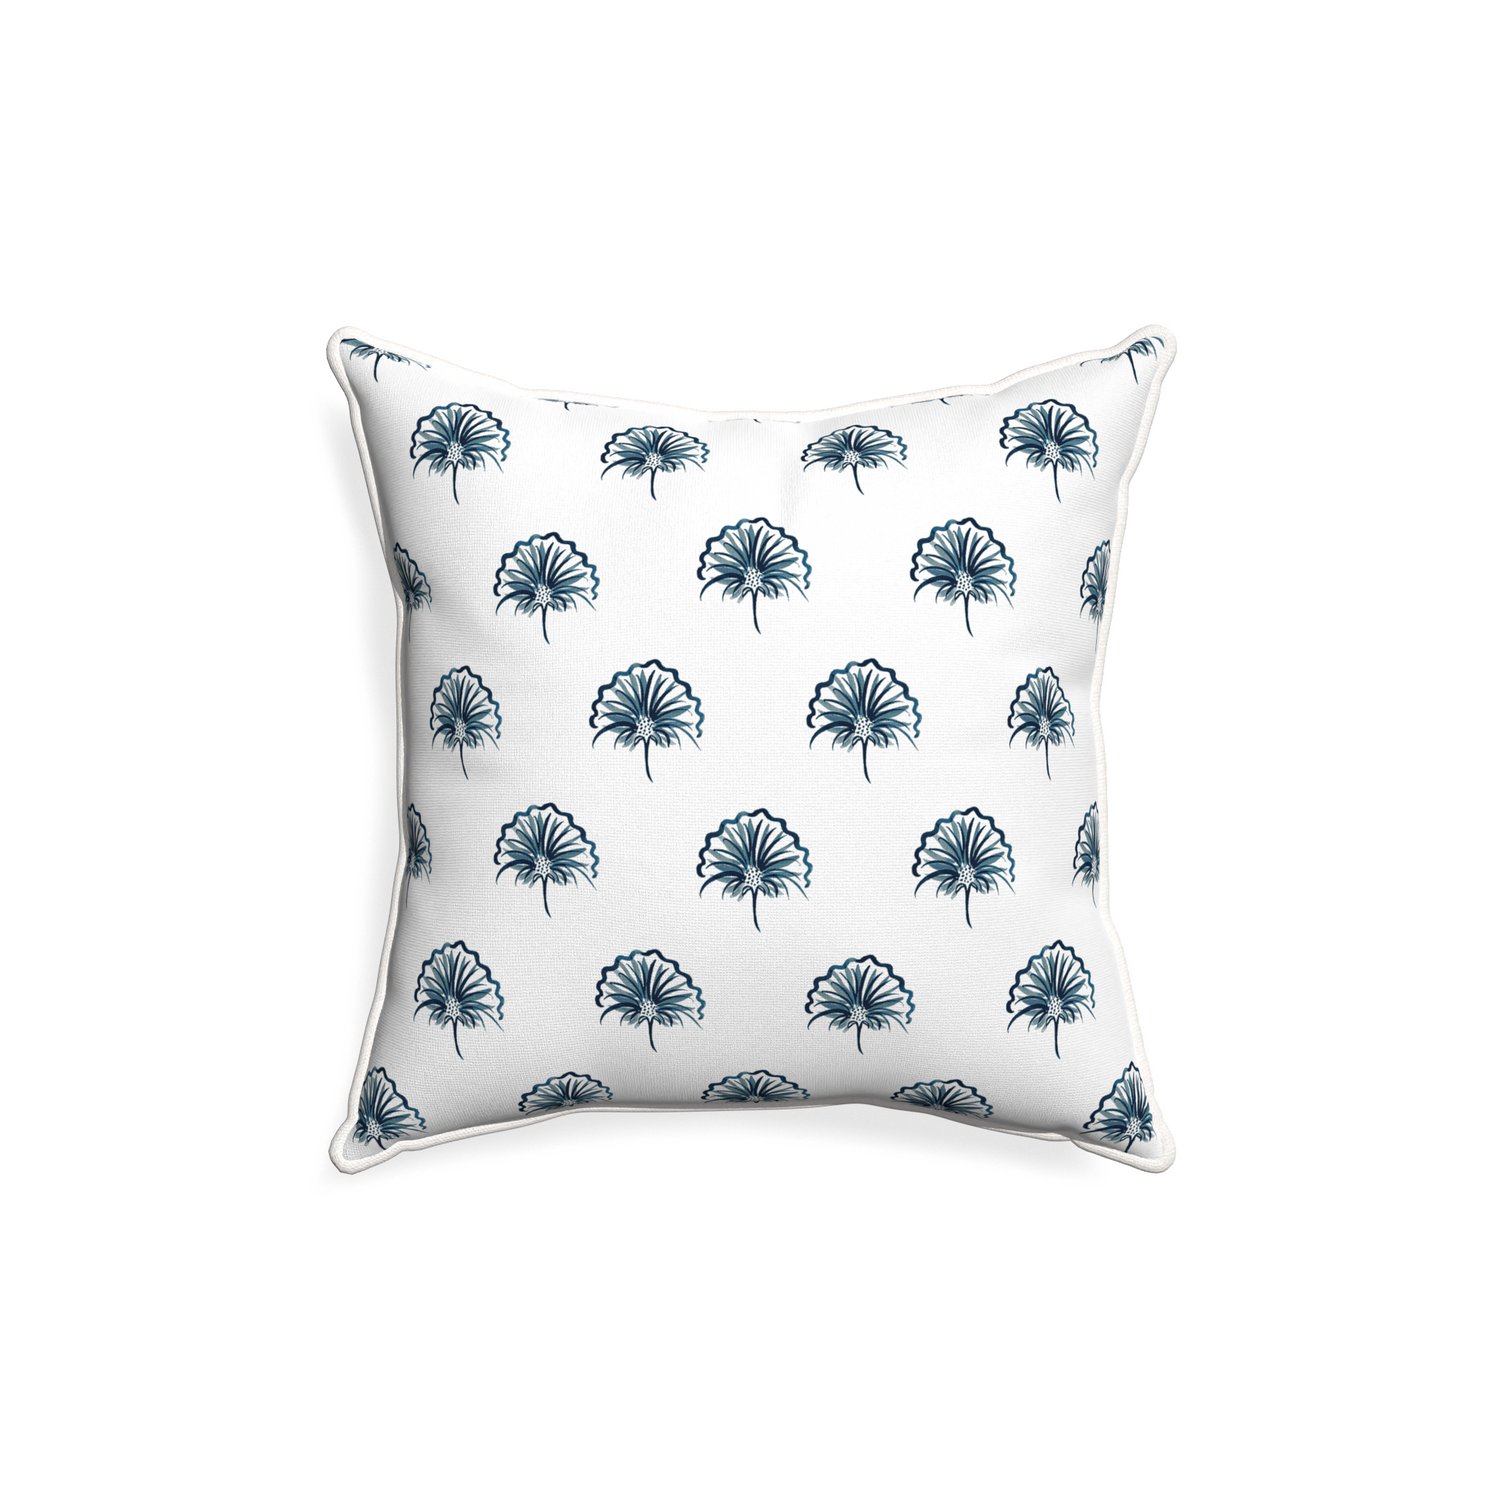 18-square penelope midnight custom pillow with snow piping on white background